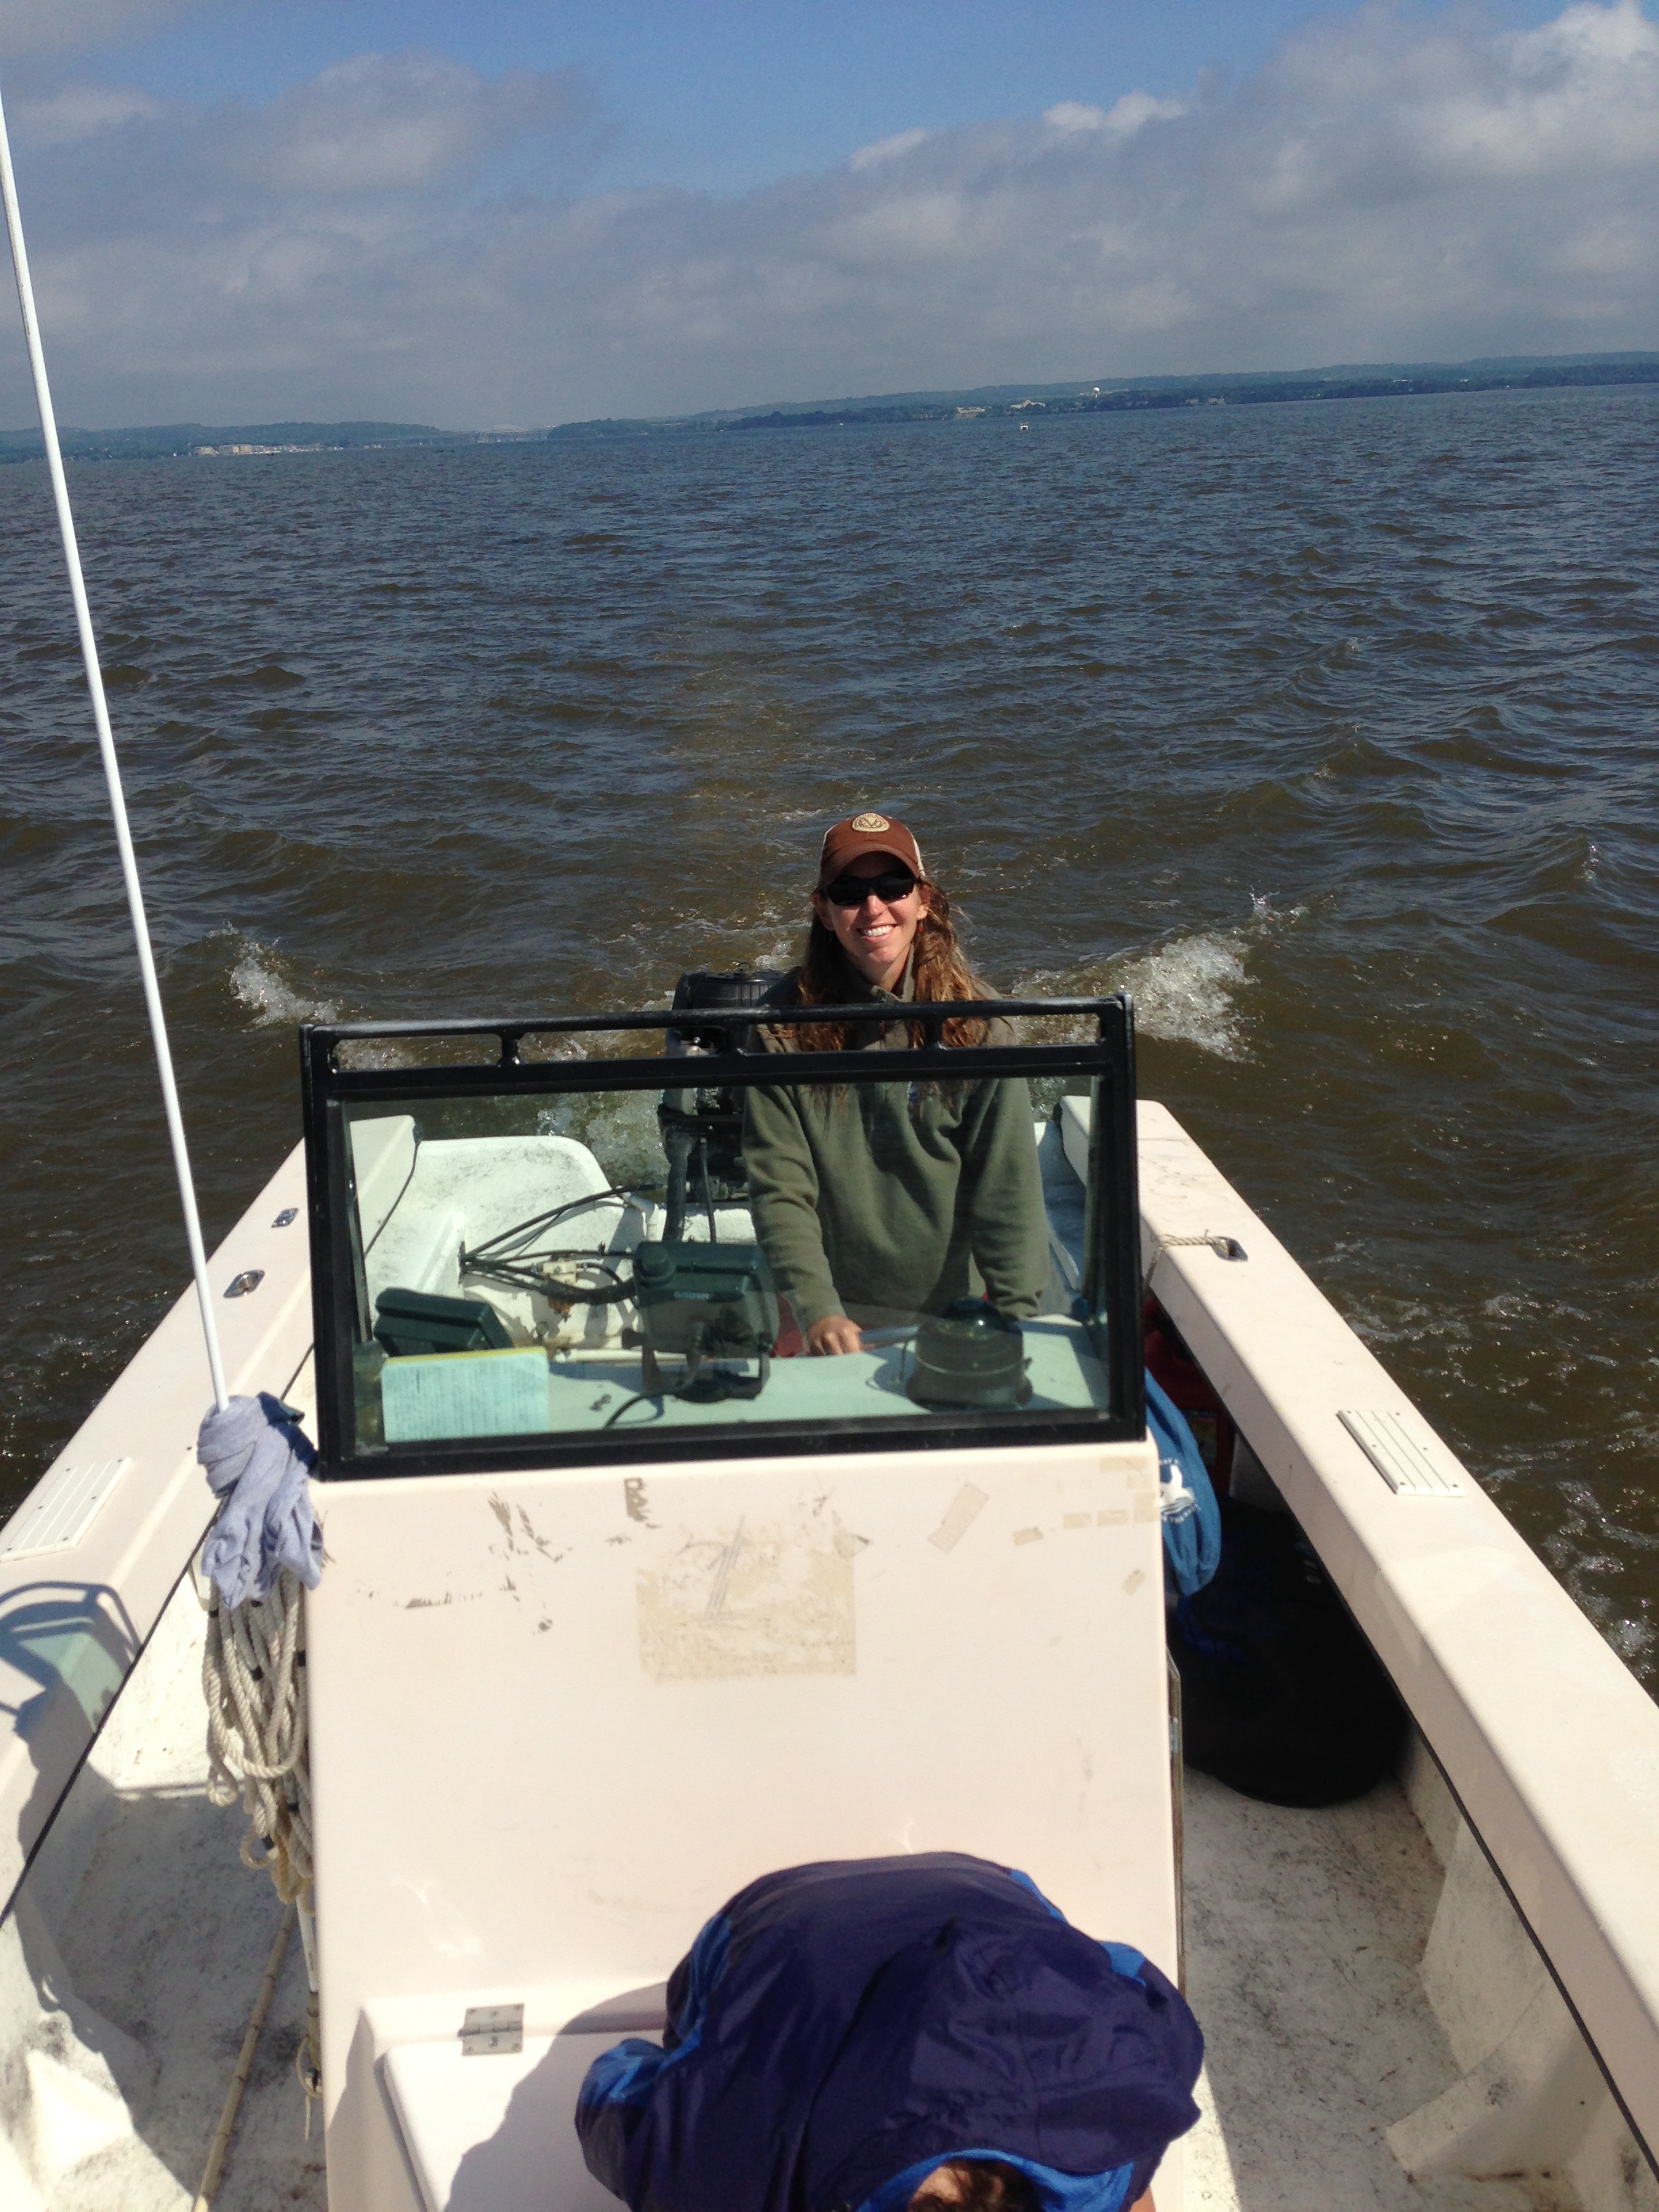 driving the skiff.